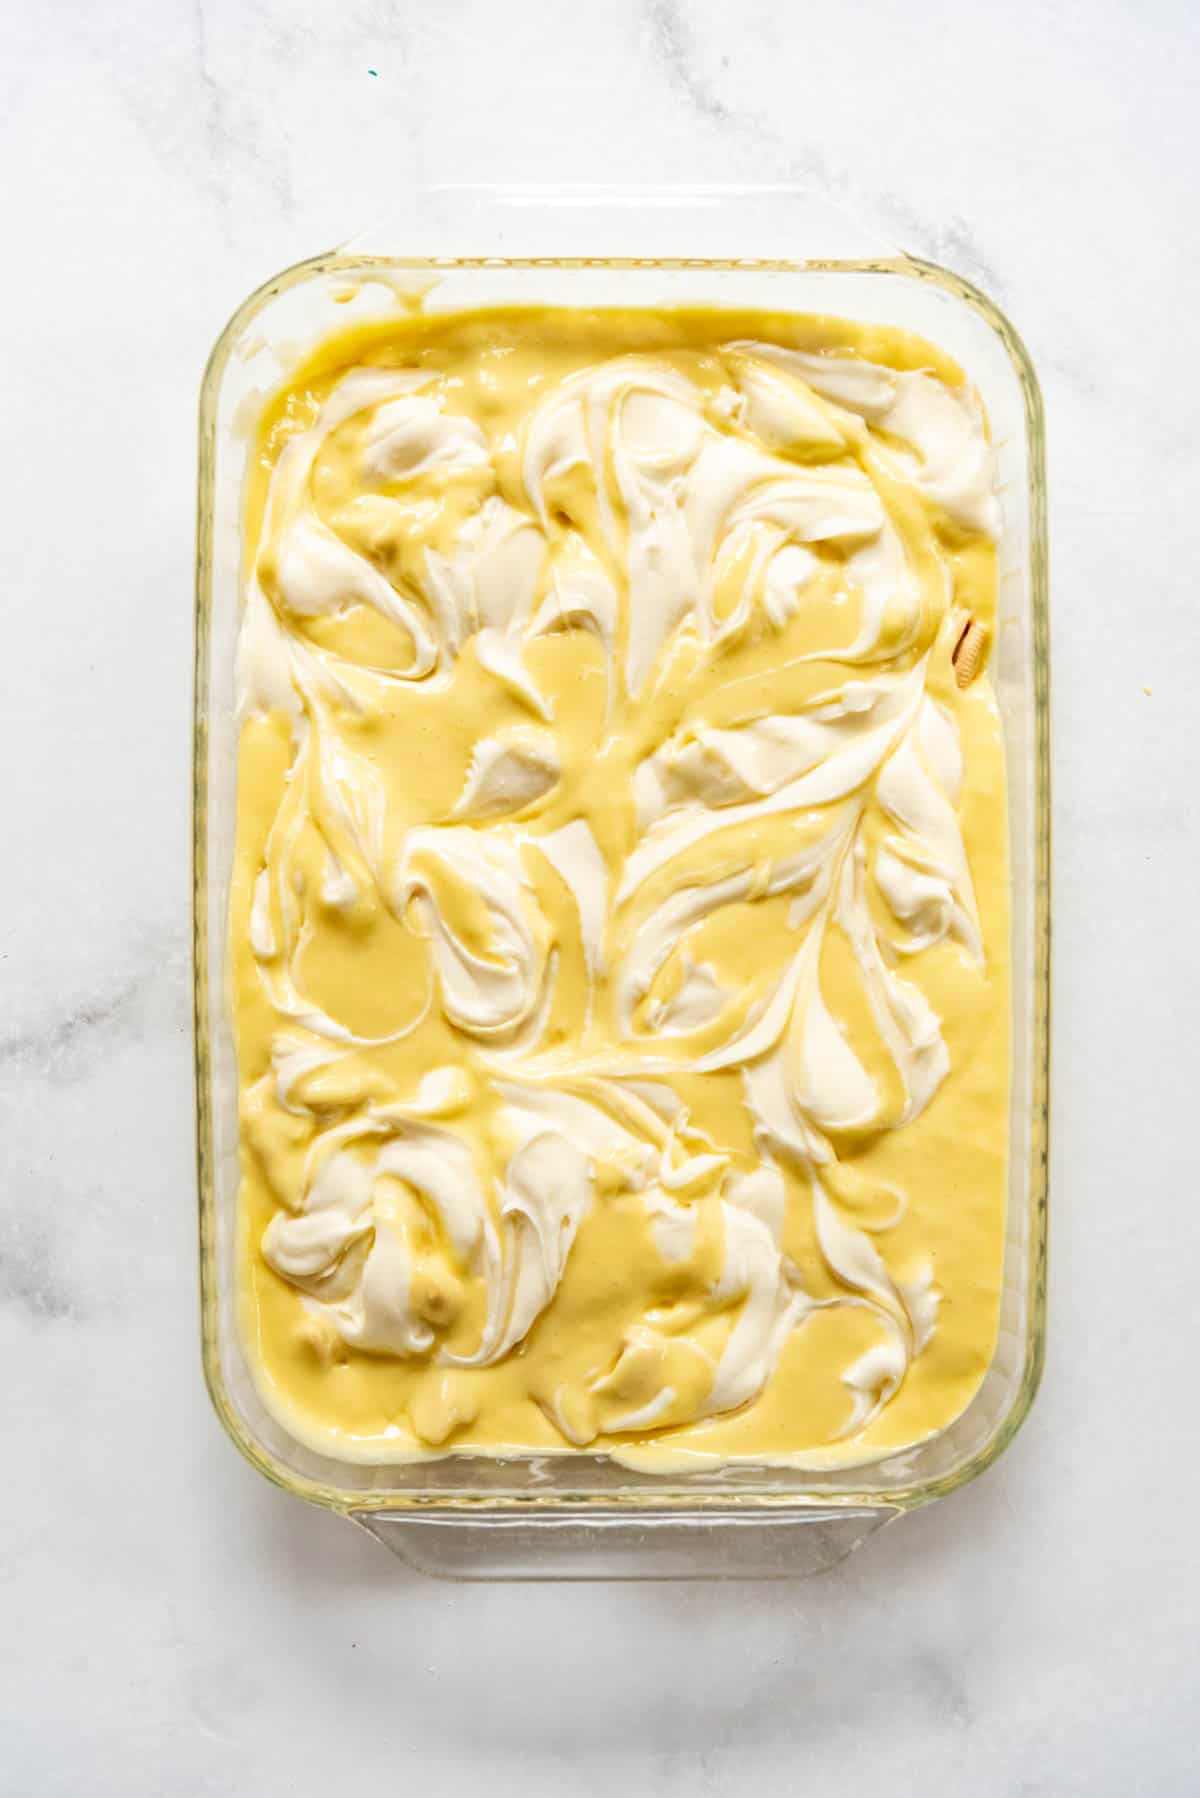 Cream cheese frosting swirled into cake batter in a 9x13-inch pan.